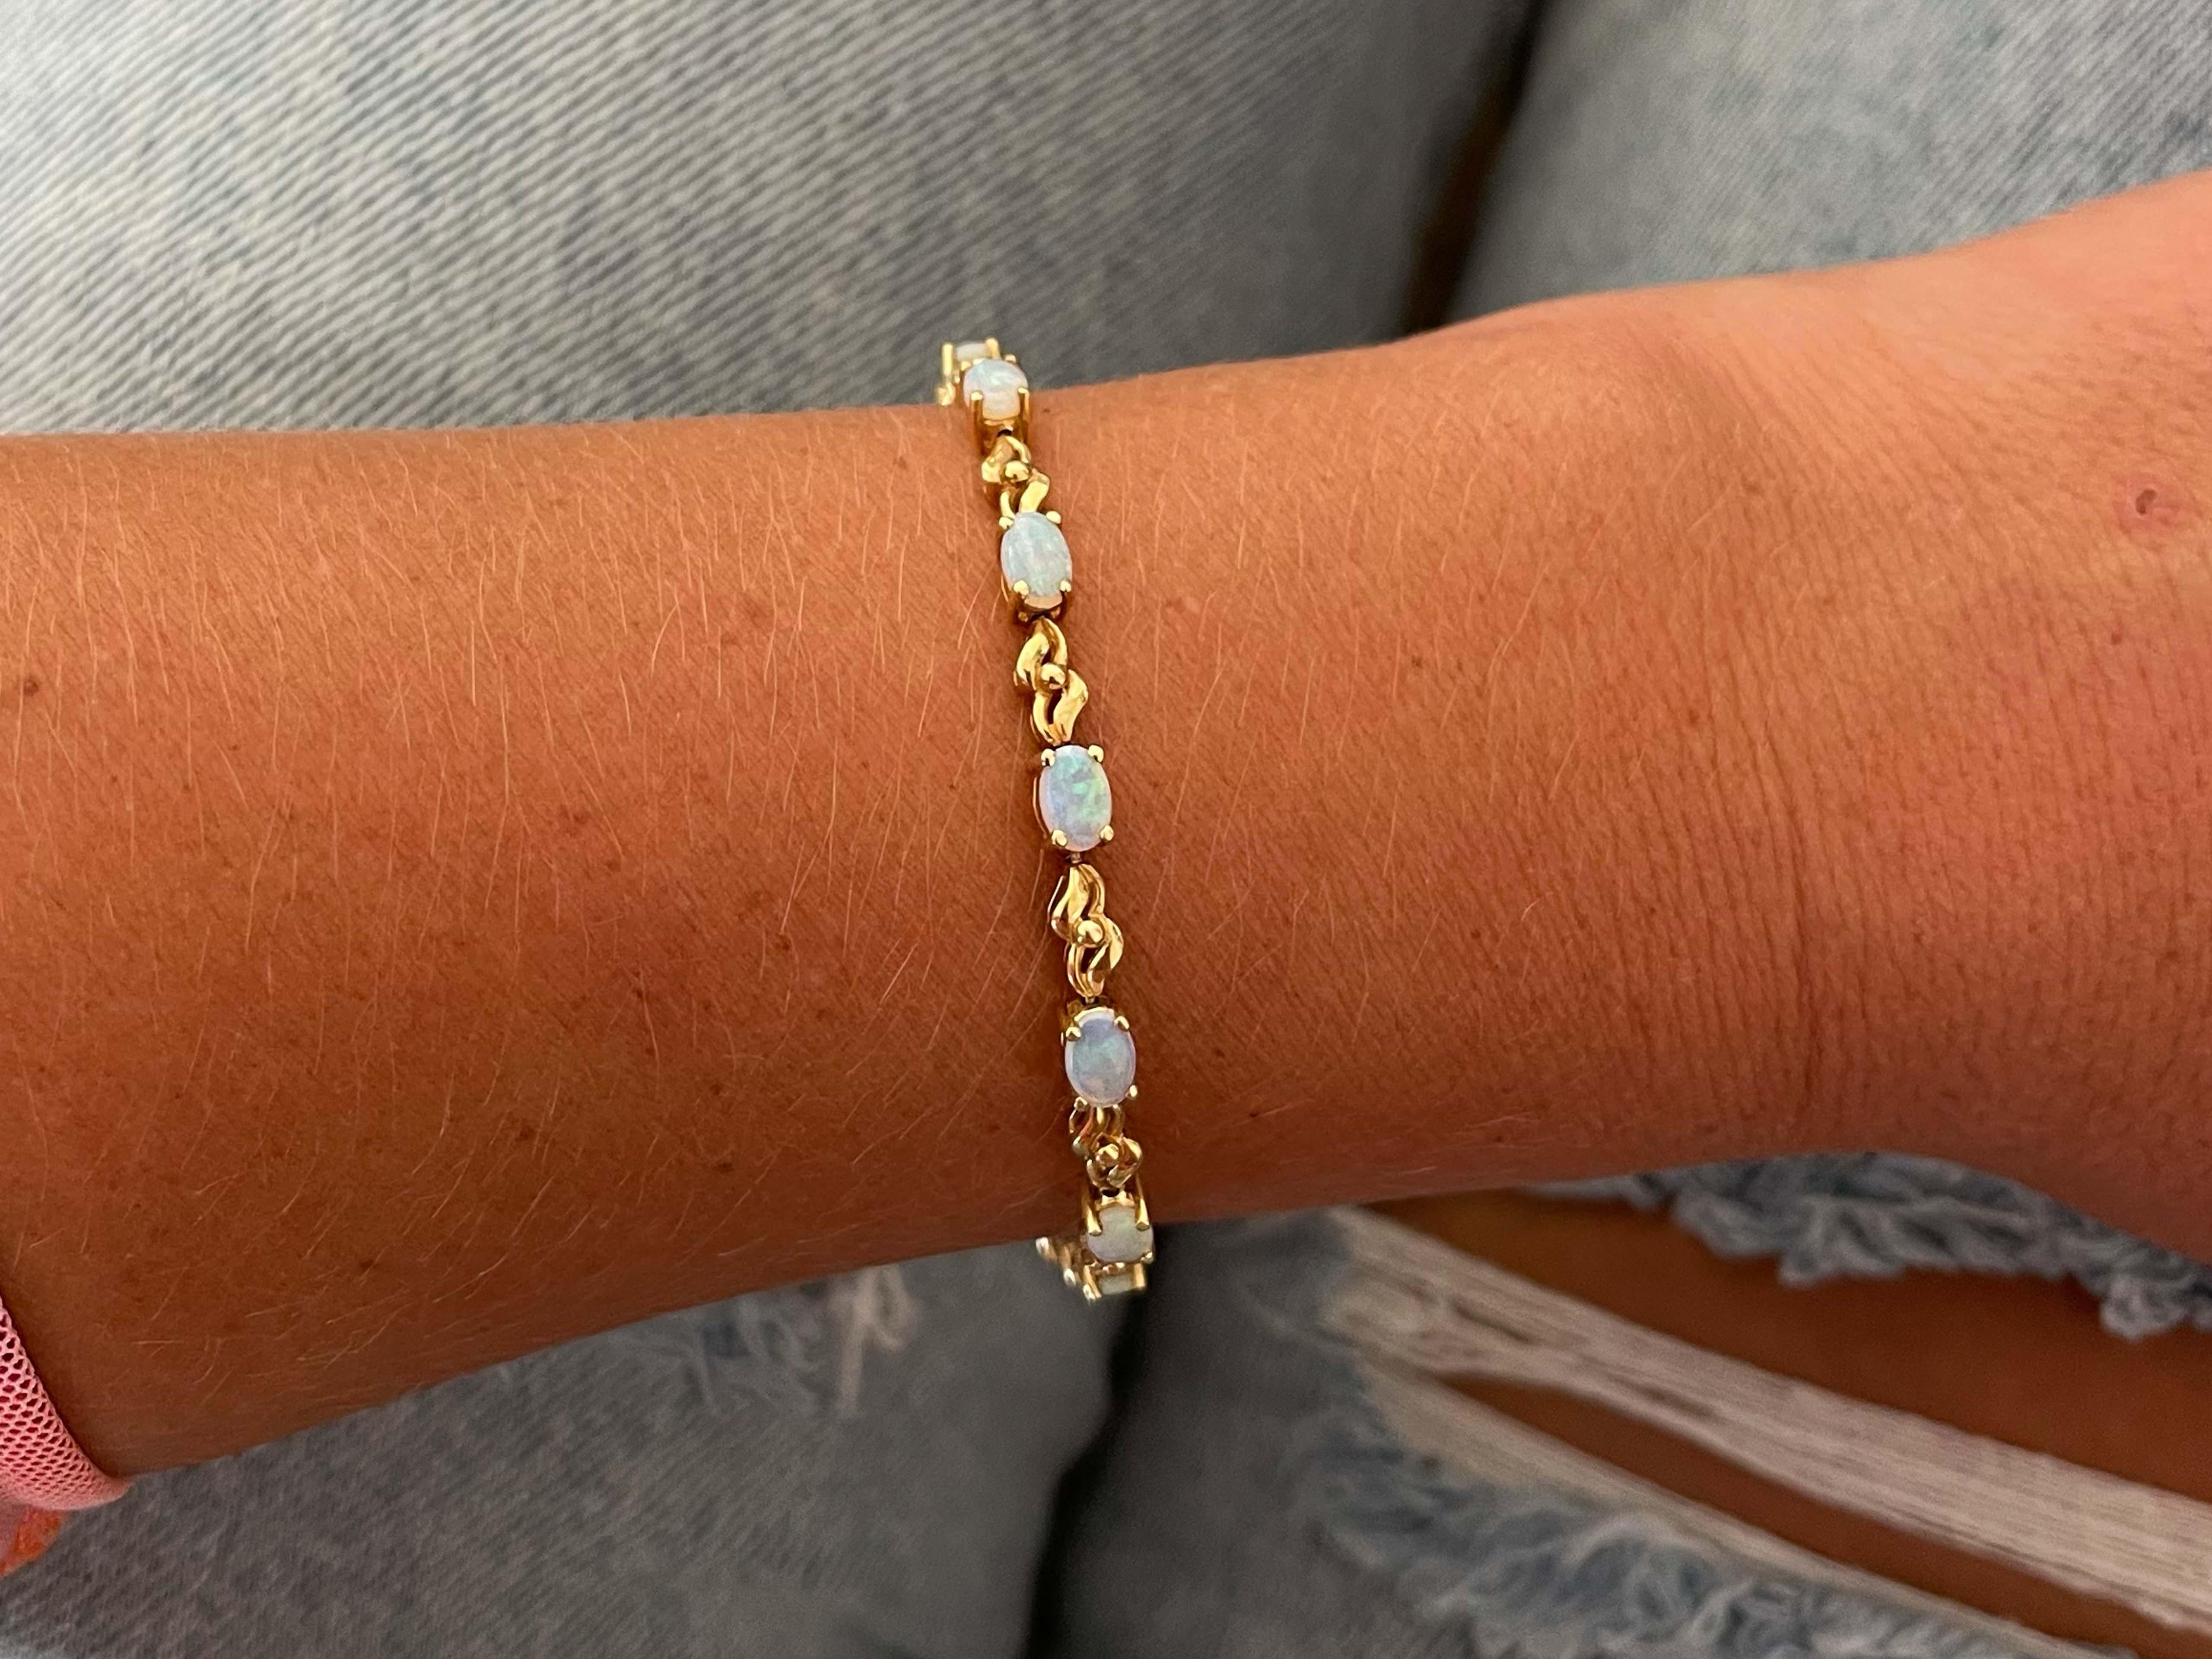 Bracelet Specifications:

Metal: 14k Yellow Gold

Opal Count: 13 Oval Opals

Opal Carat Weight: ~2.4 carats

Bracelet Length: ~7.25 inches

Bracelet Width: ~ 4 mm

Total Weight: 9.6 Grams

Condition: Vintage, Excellent

Stamped: 